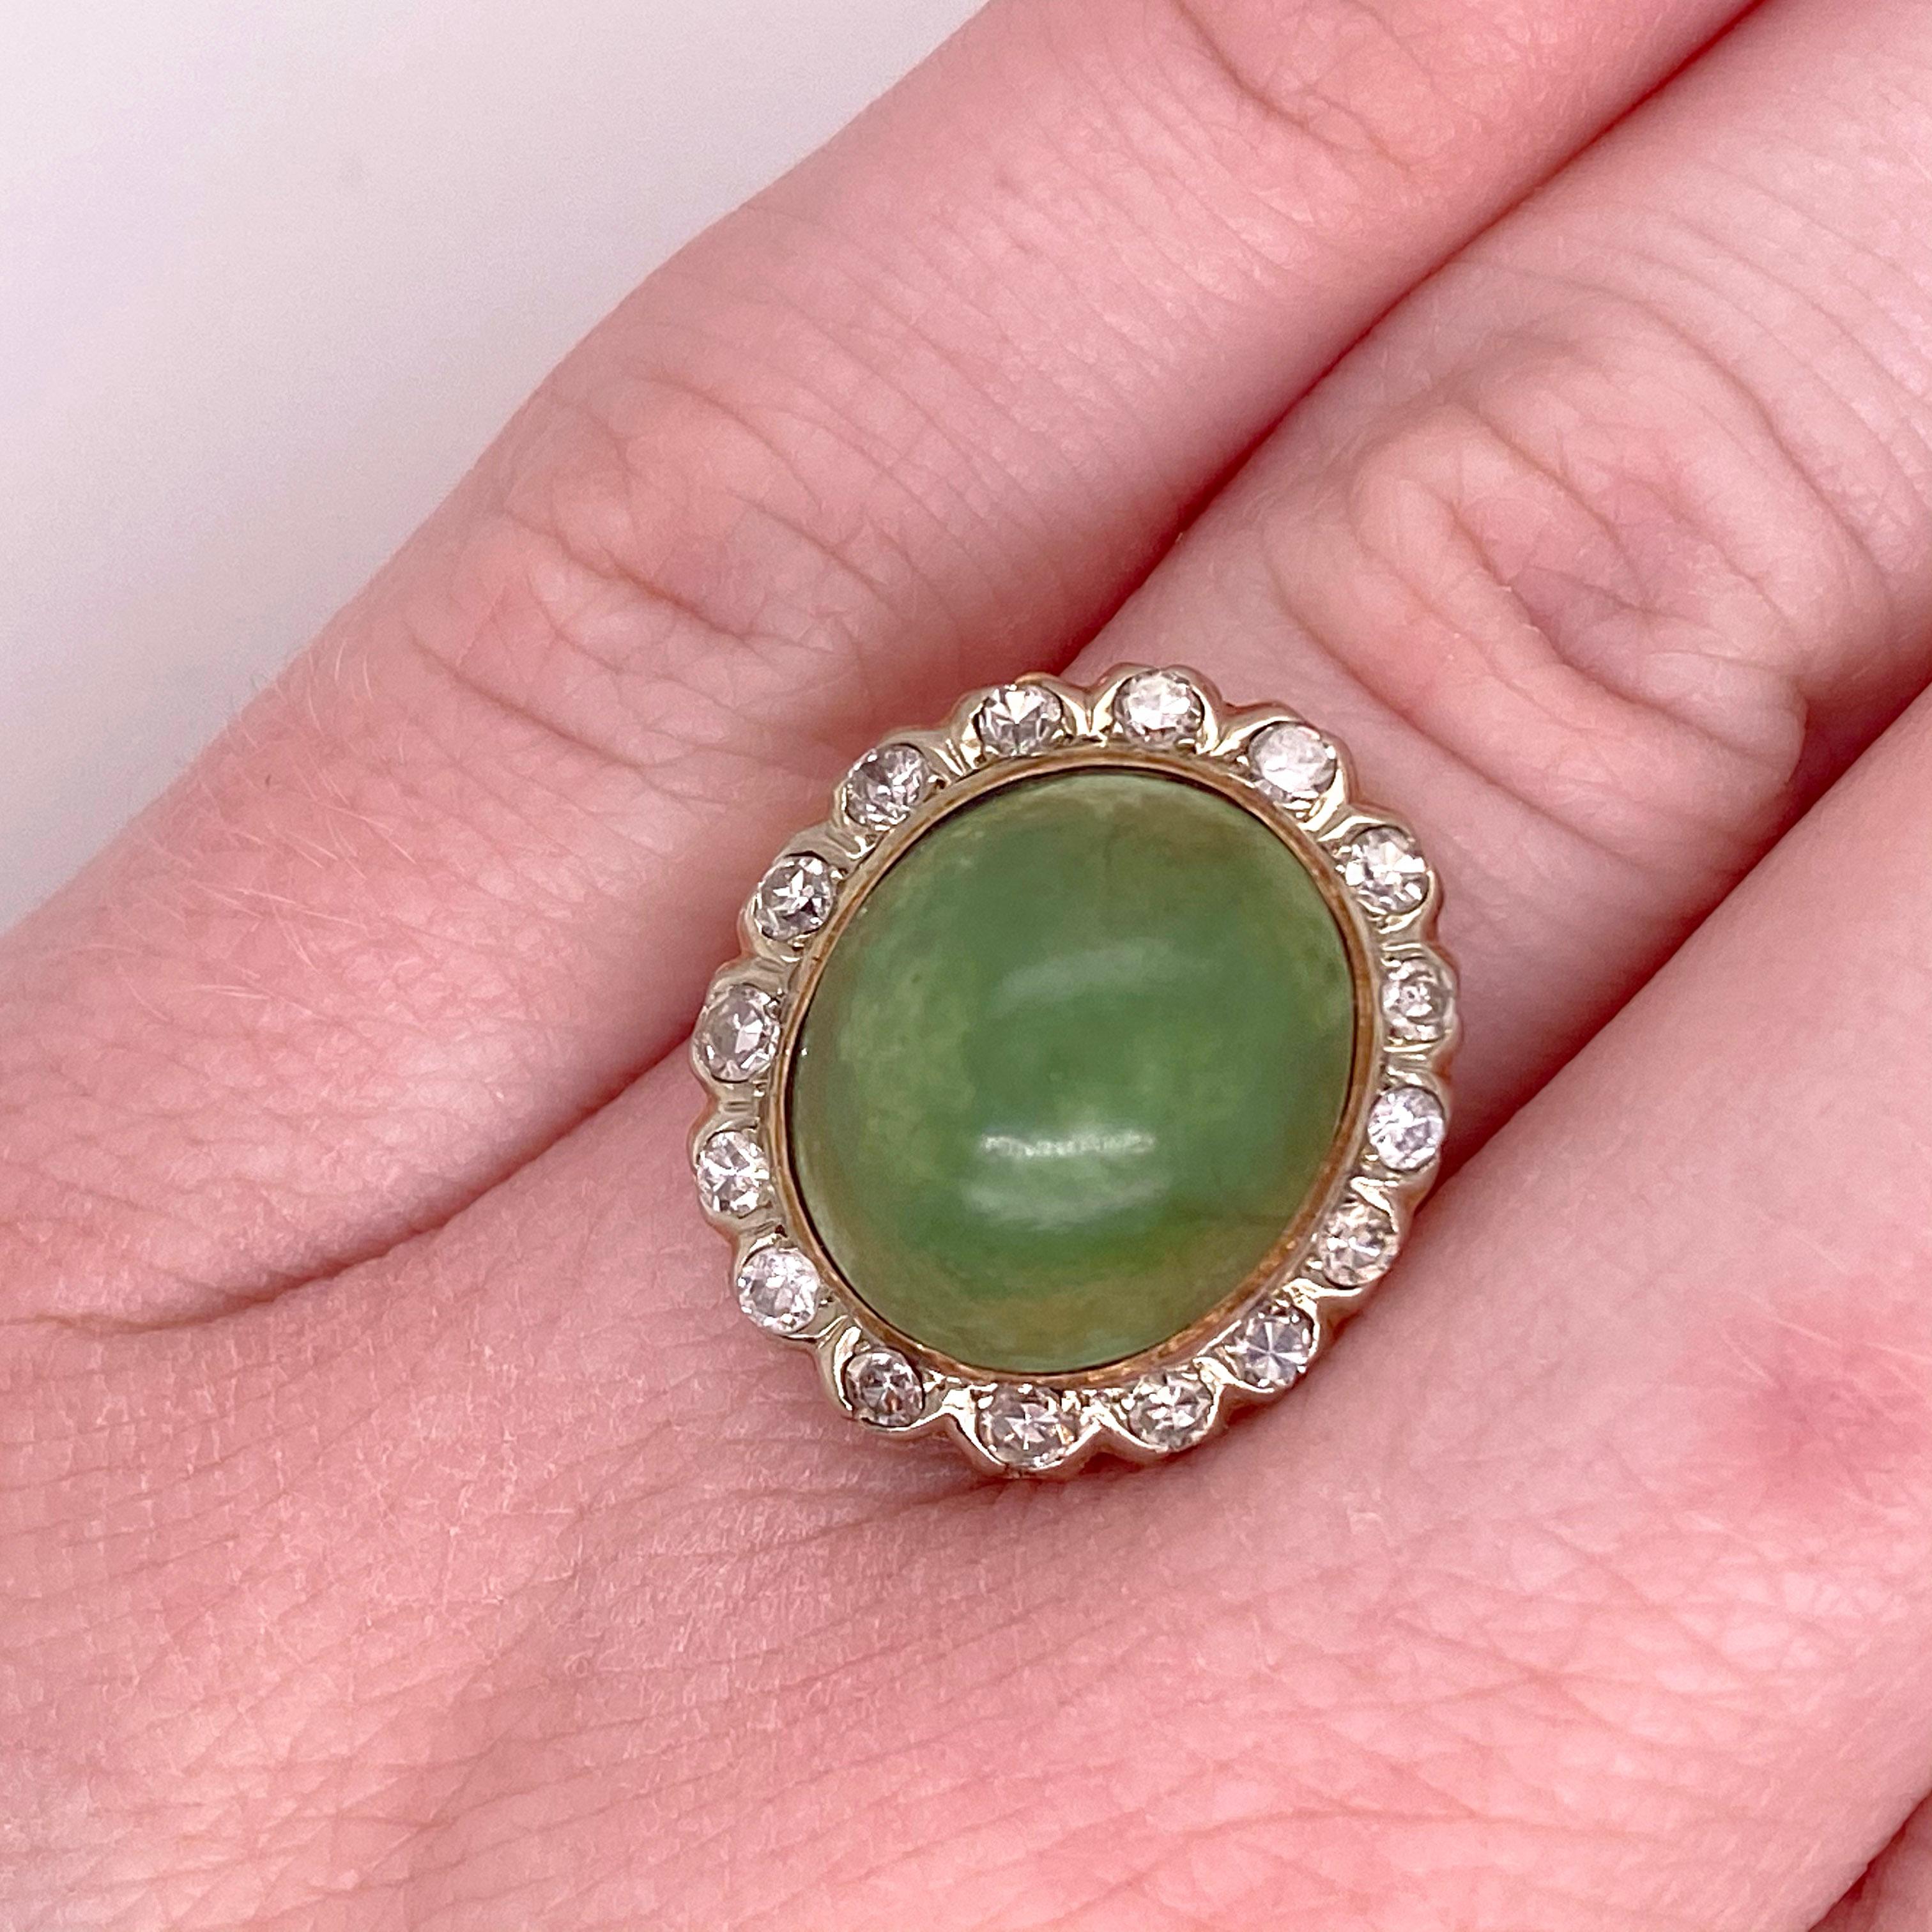 This estate jadeite jade ring is made with true quality of the 1950s Circa 1950.  The oval jade has an oval halo of diamonds around it.   The ring is in excellent shape and is sizable!
14K Yellow Gold
Gemstone Carat Weight-13.65 Carats Total